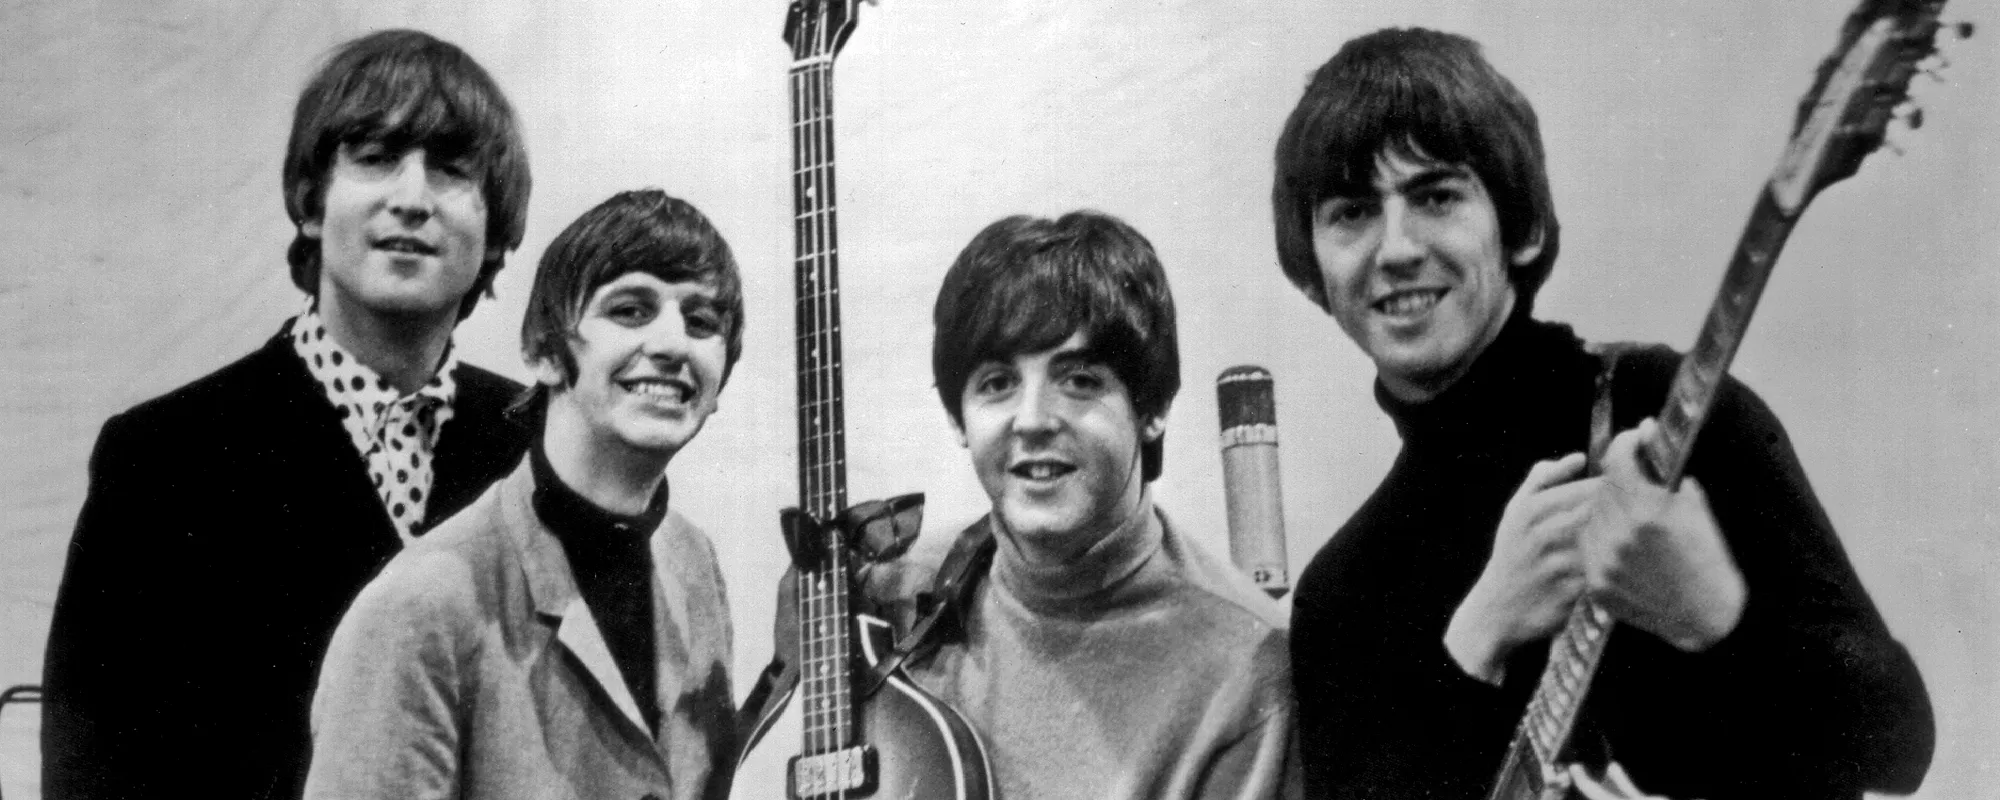 3 Songs For People Who Say They Don’t Like the Beatles